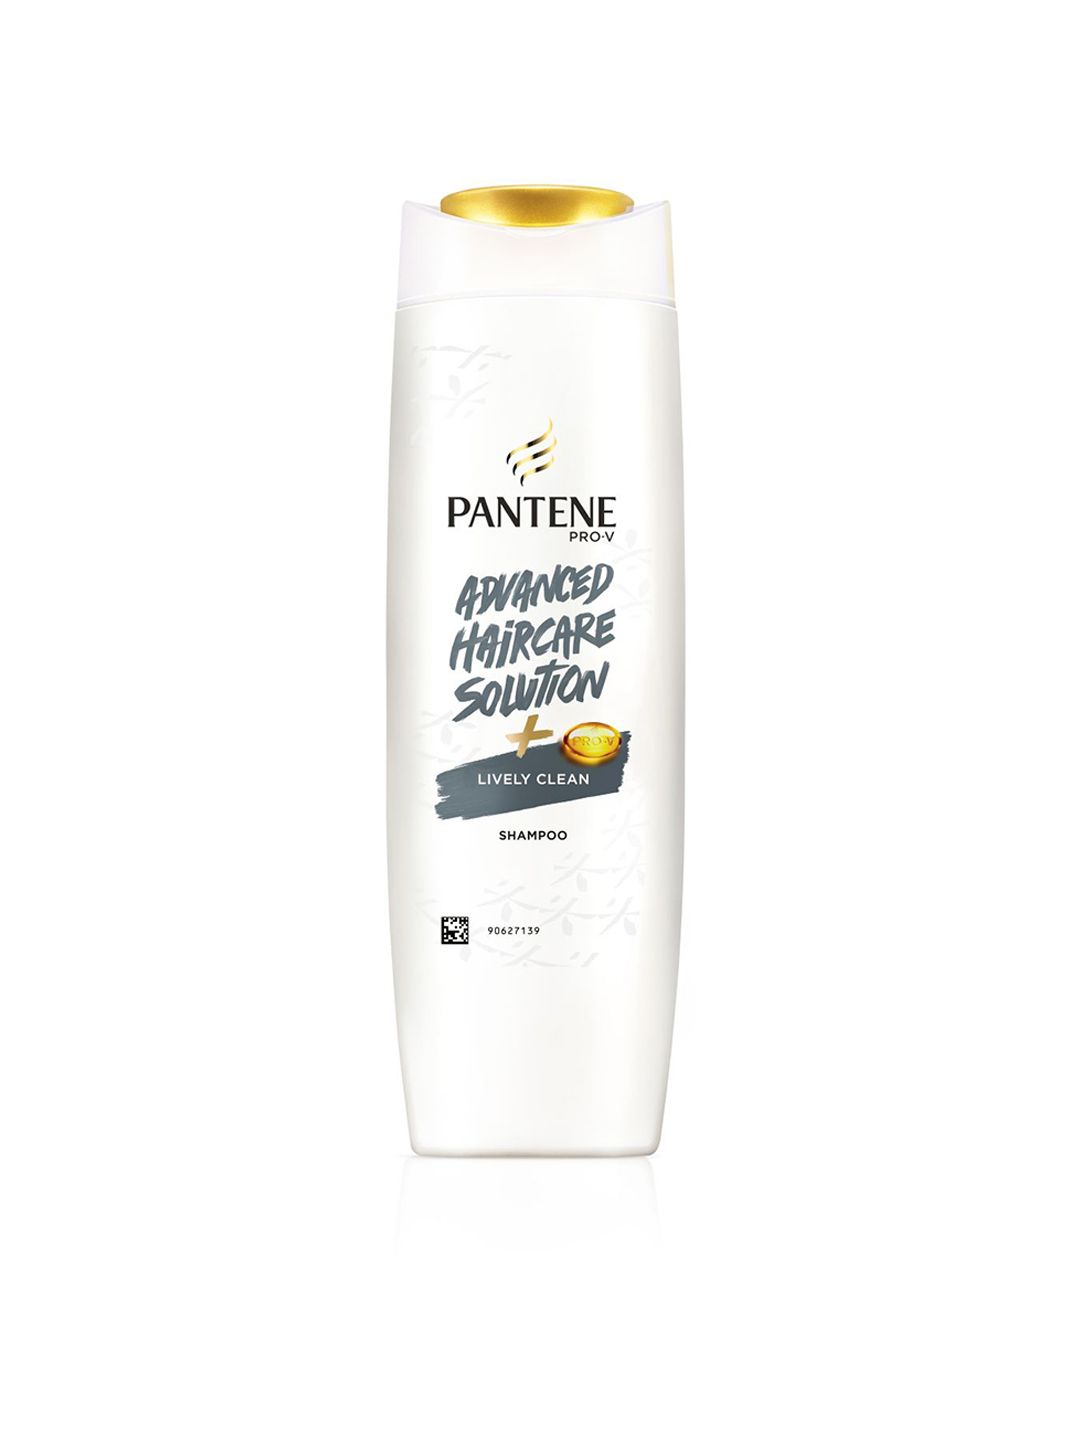 Pantene Unisex Advanced Hair Care Solution Lively Clean Shampoo with Pro-Vitamin 200 ml Price in India